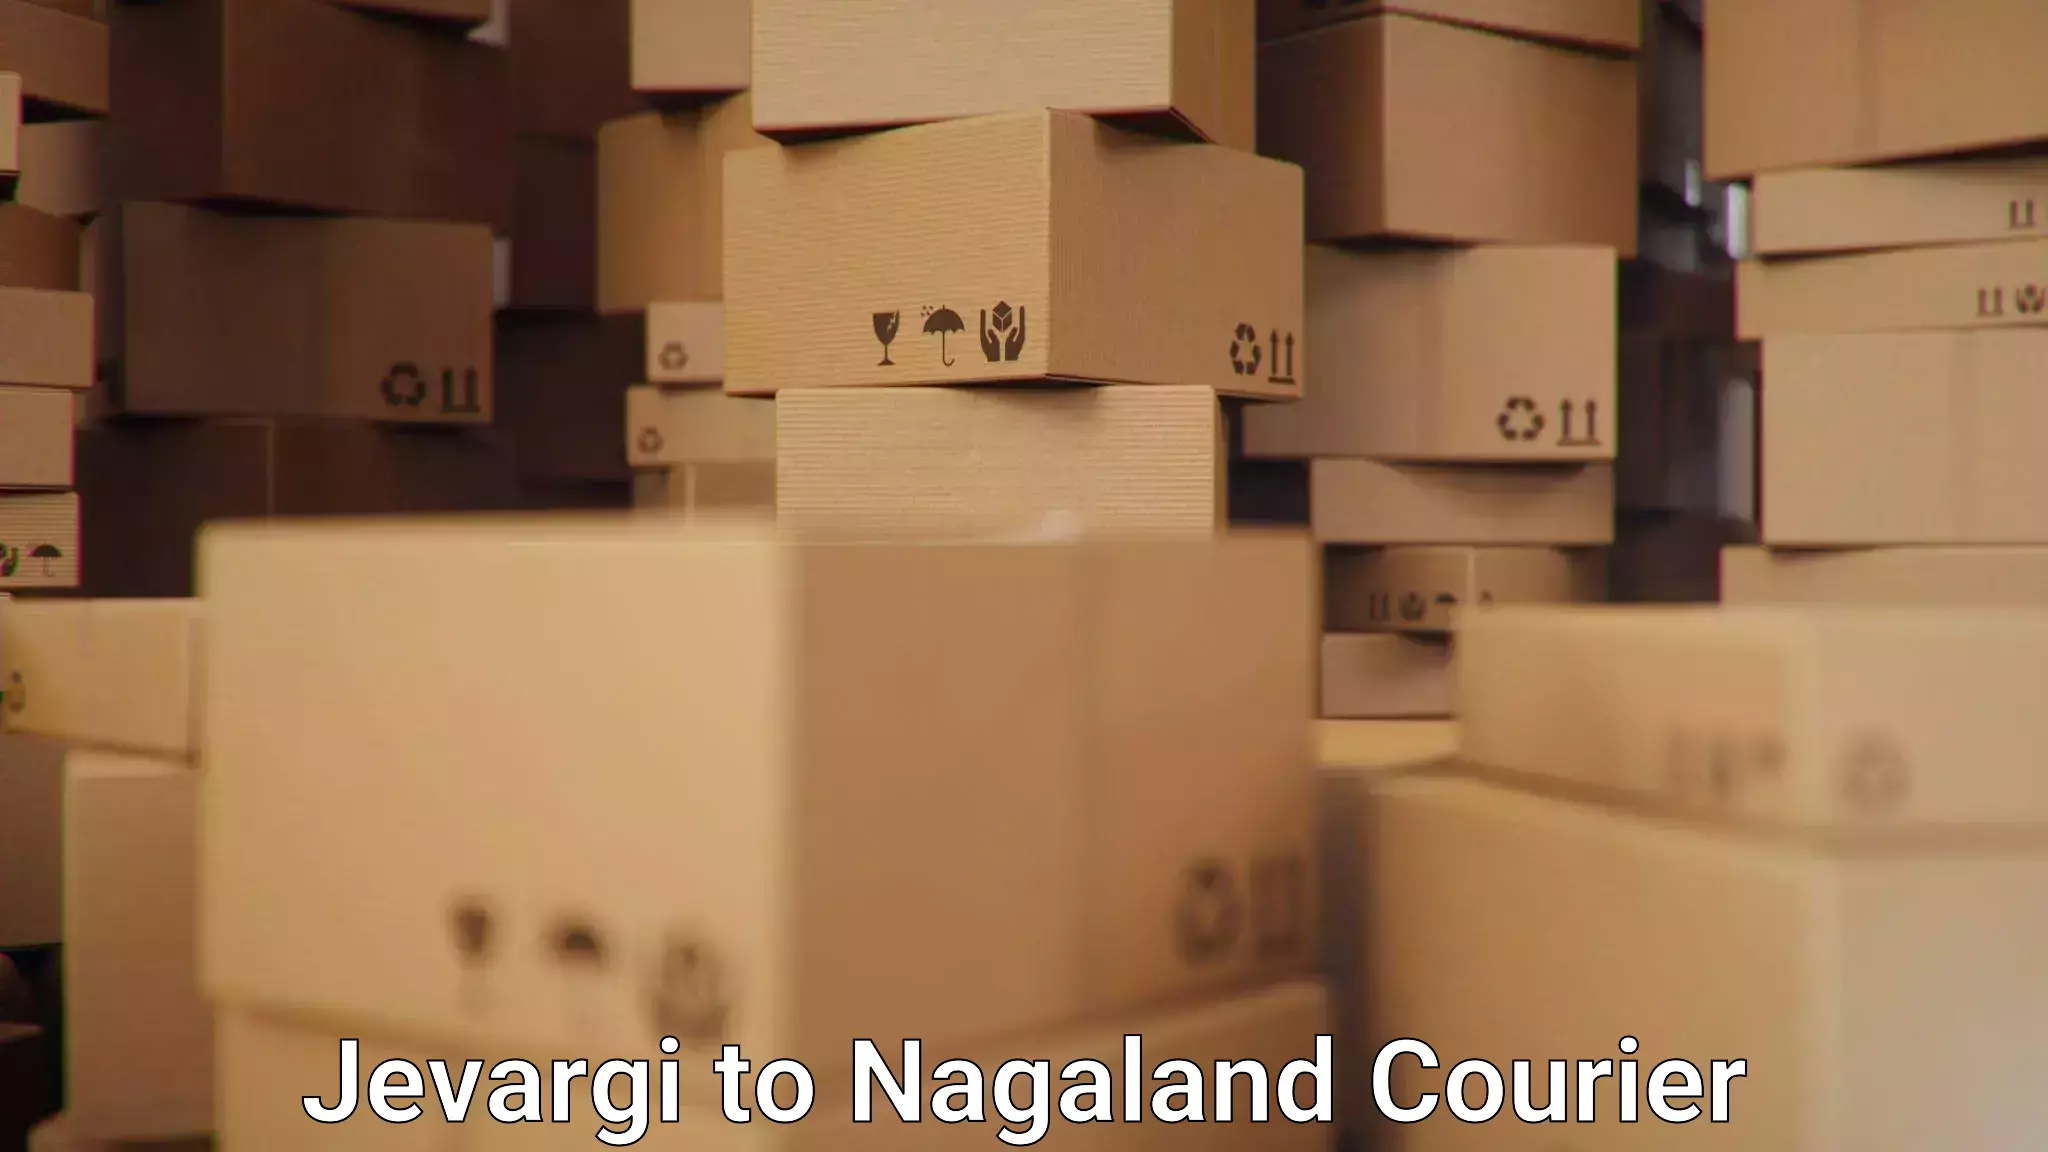 Reliable delivery network Jevargi to NIT Nagaland